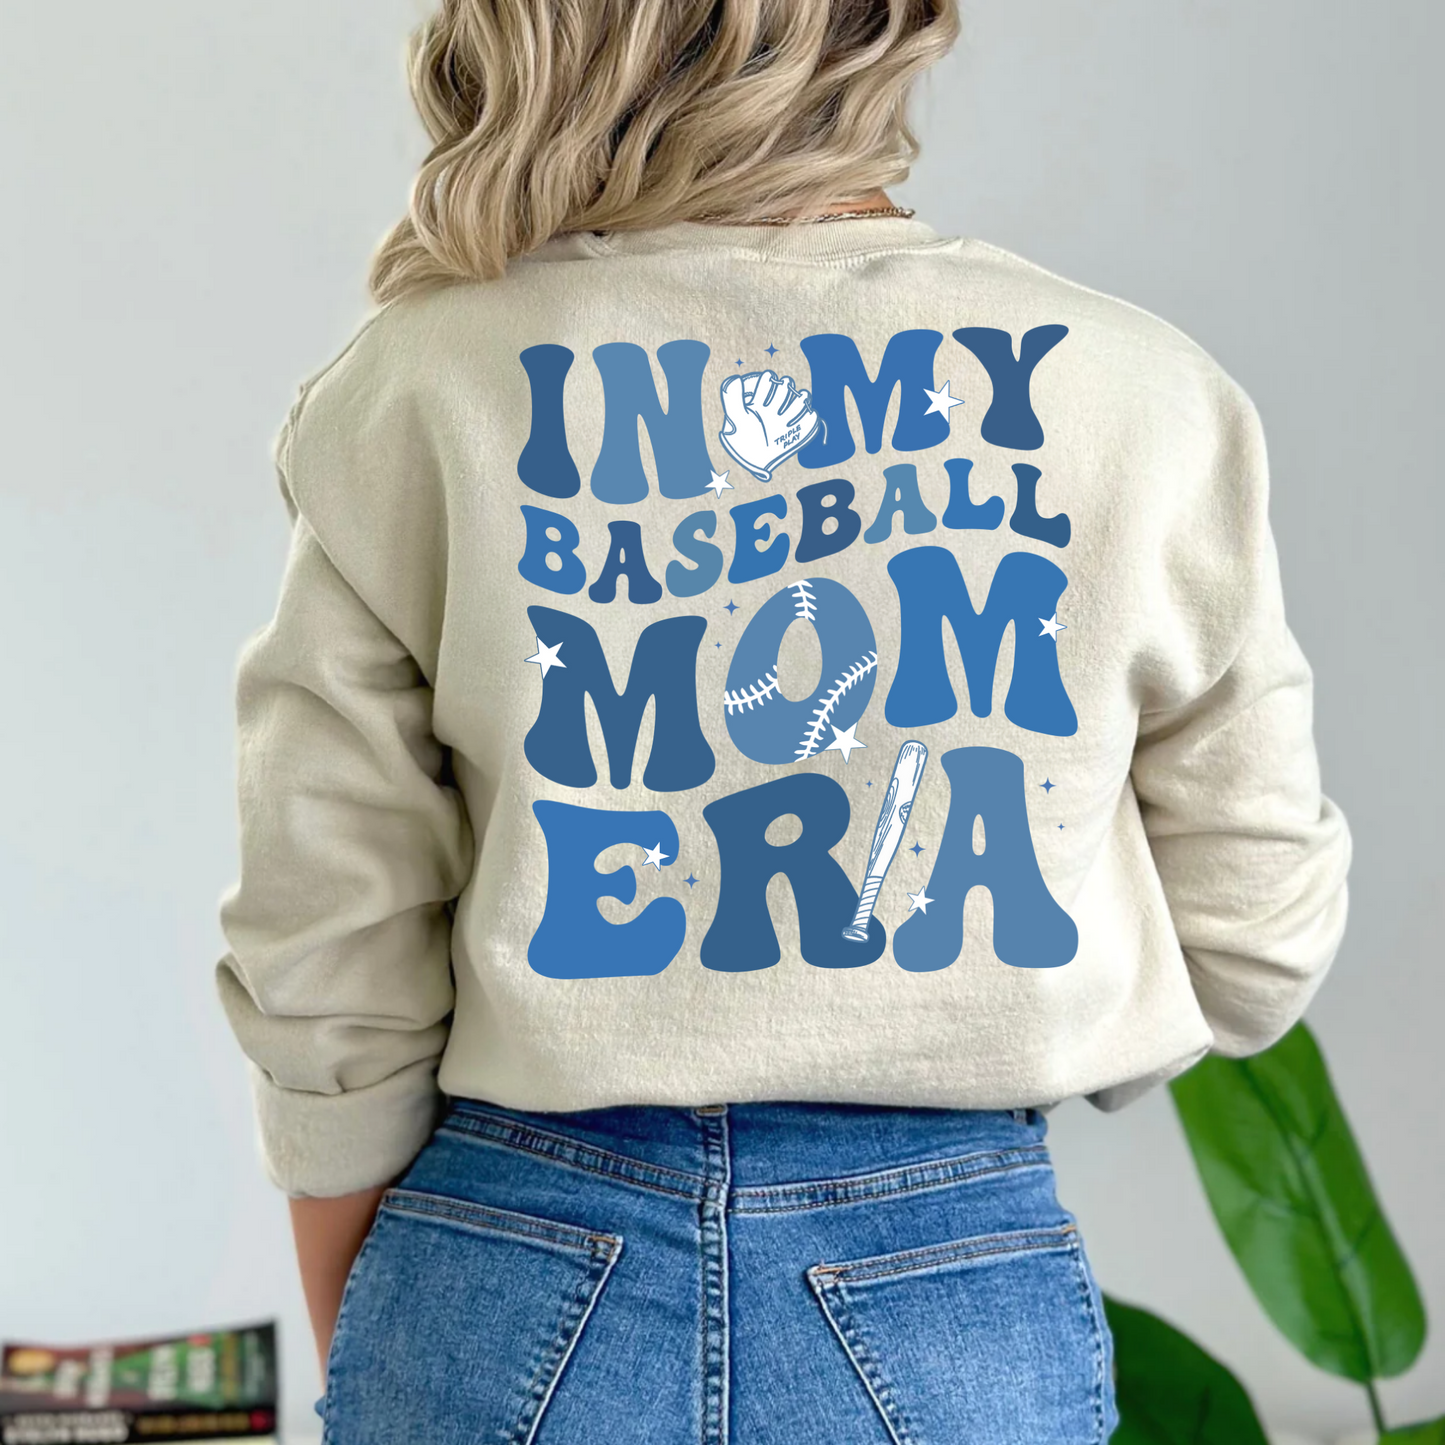 (Shirt not included) In My Baseball Mom Era - Clear Film Transfer